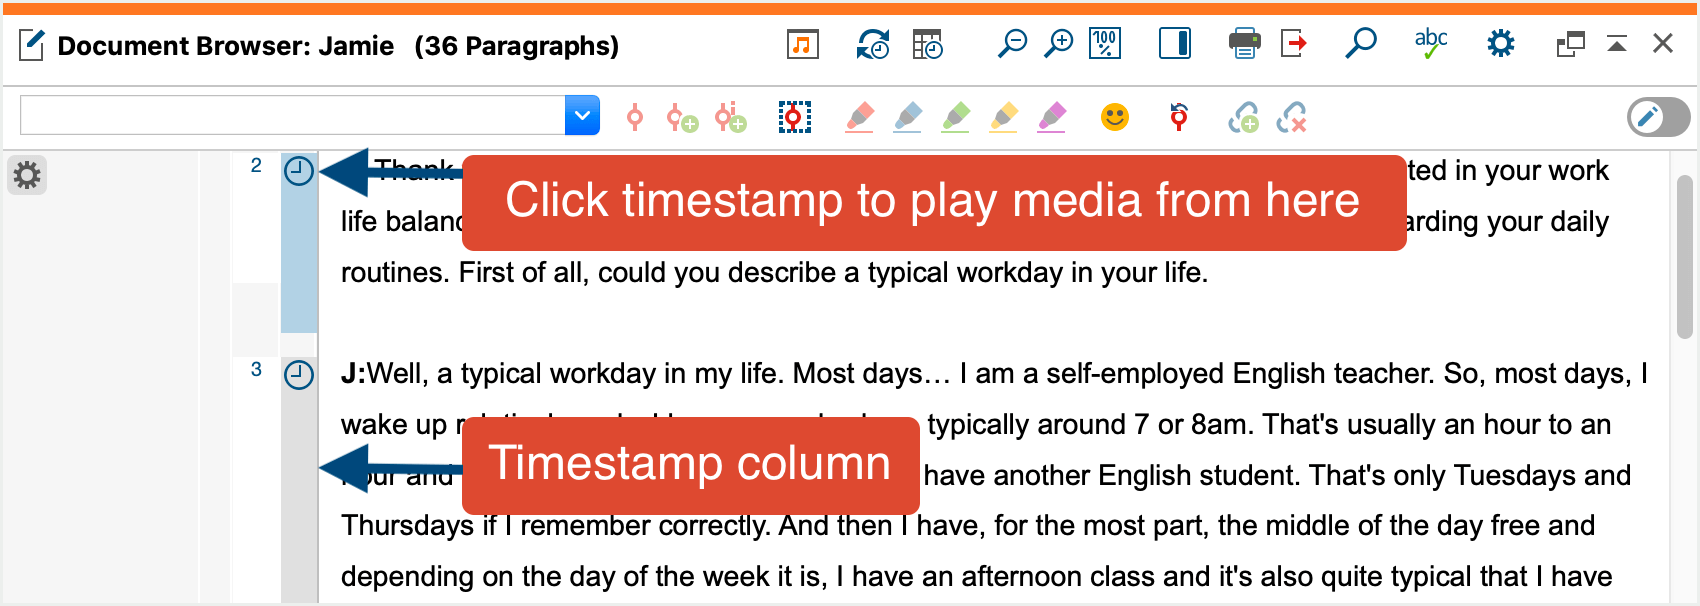 Timestamps in the “Document Browser”